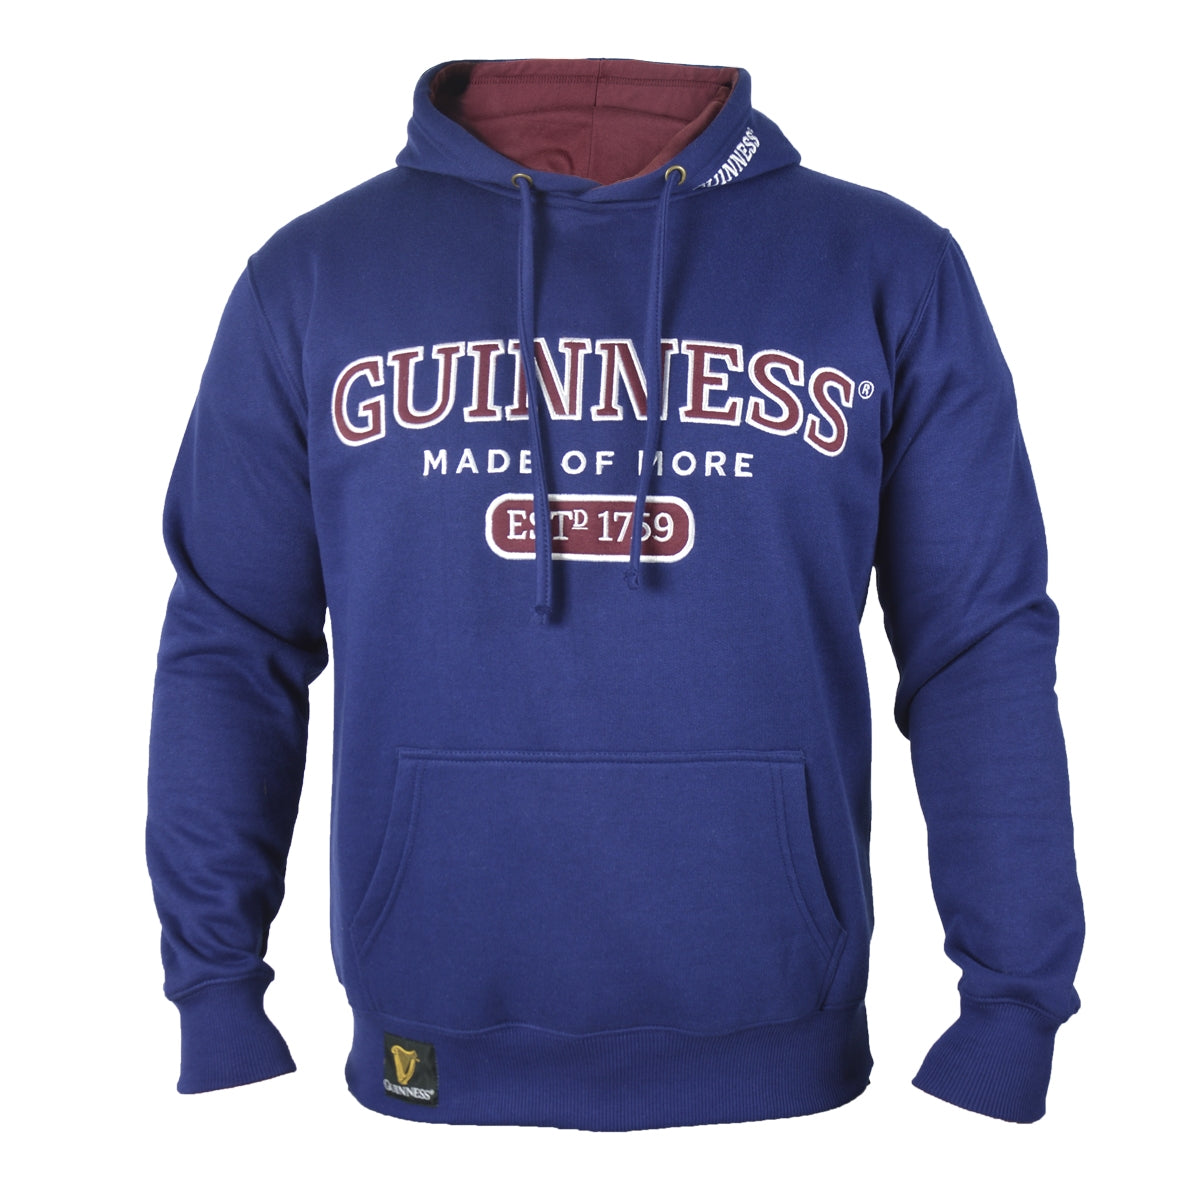 Signature sweatshirt Guinness hoodie crew neck is replaced with the product and brand names mentioned: "Guinness UK's Guinness Light Blue Hooded Sweatshirt.